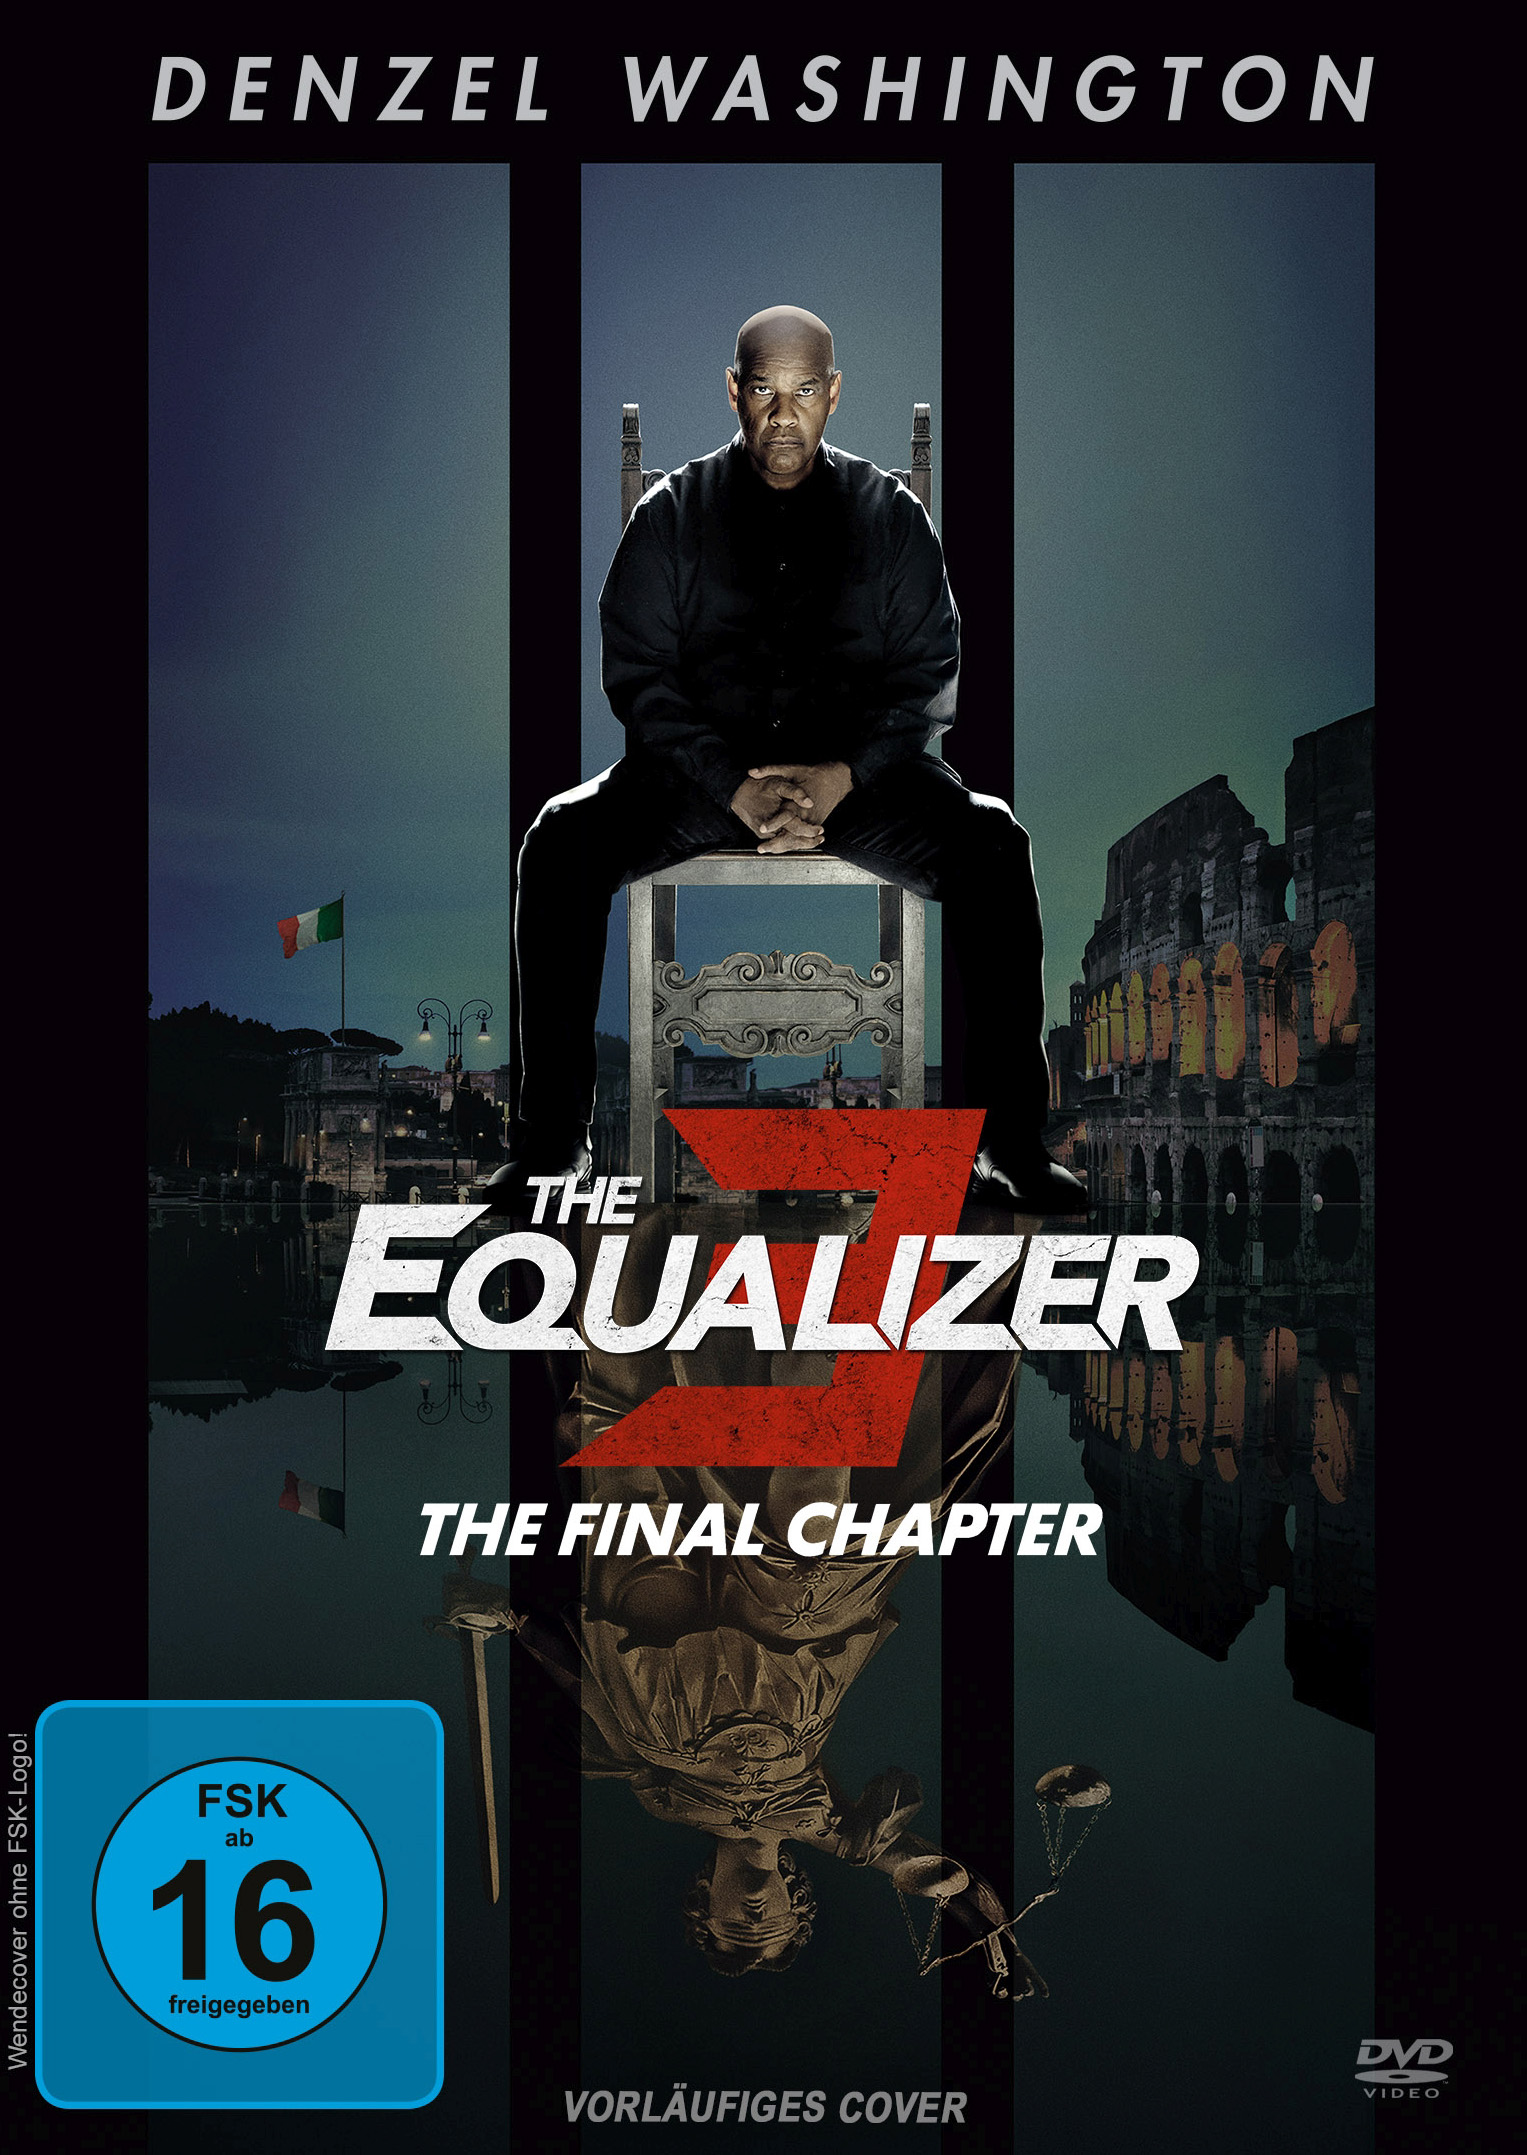 The Equalizer 3 - The Final Chapter (DVD) Cover